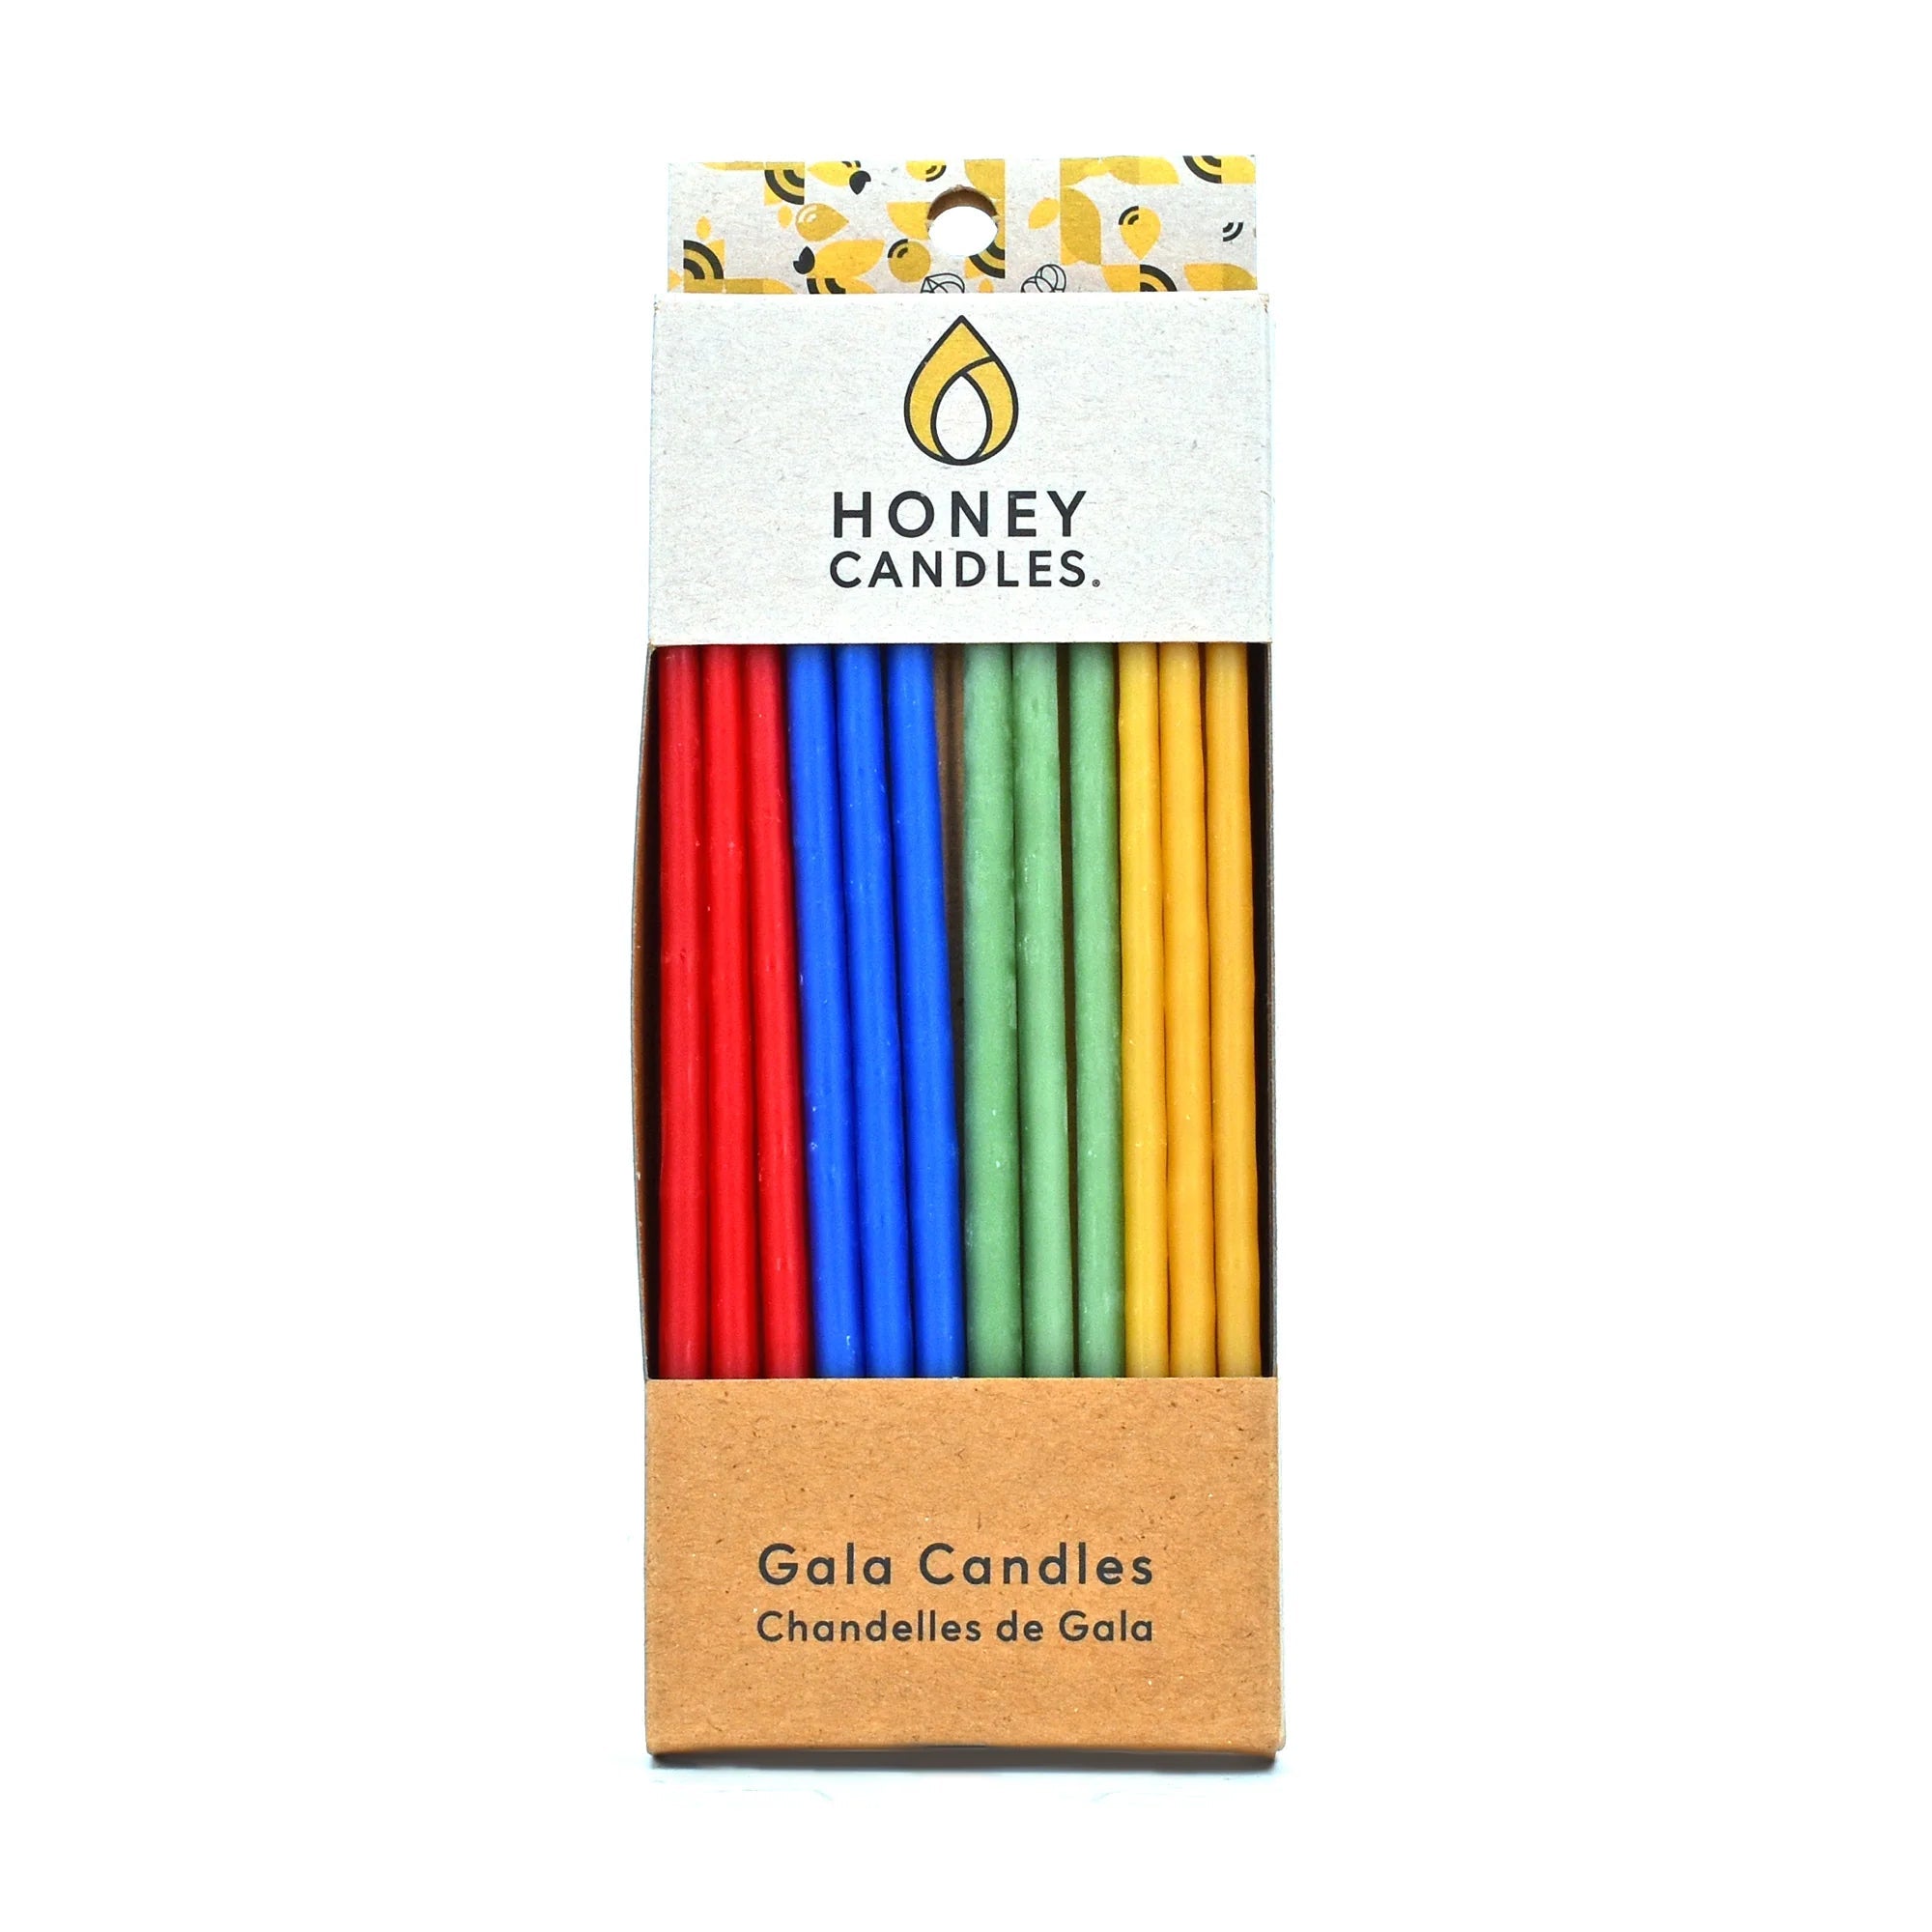 Honey Candles - 12 Pack of Gala Beeswax Candles - Royal-Honey Candles-Modern Rascals